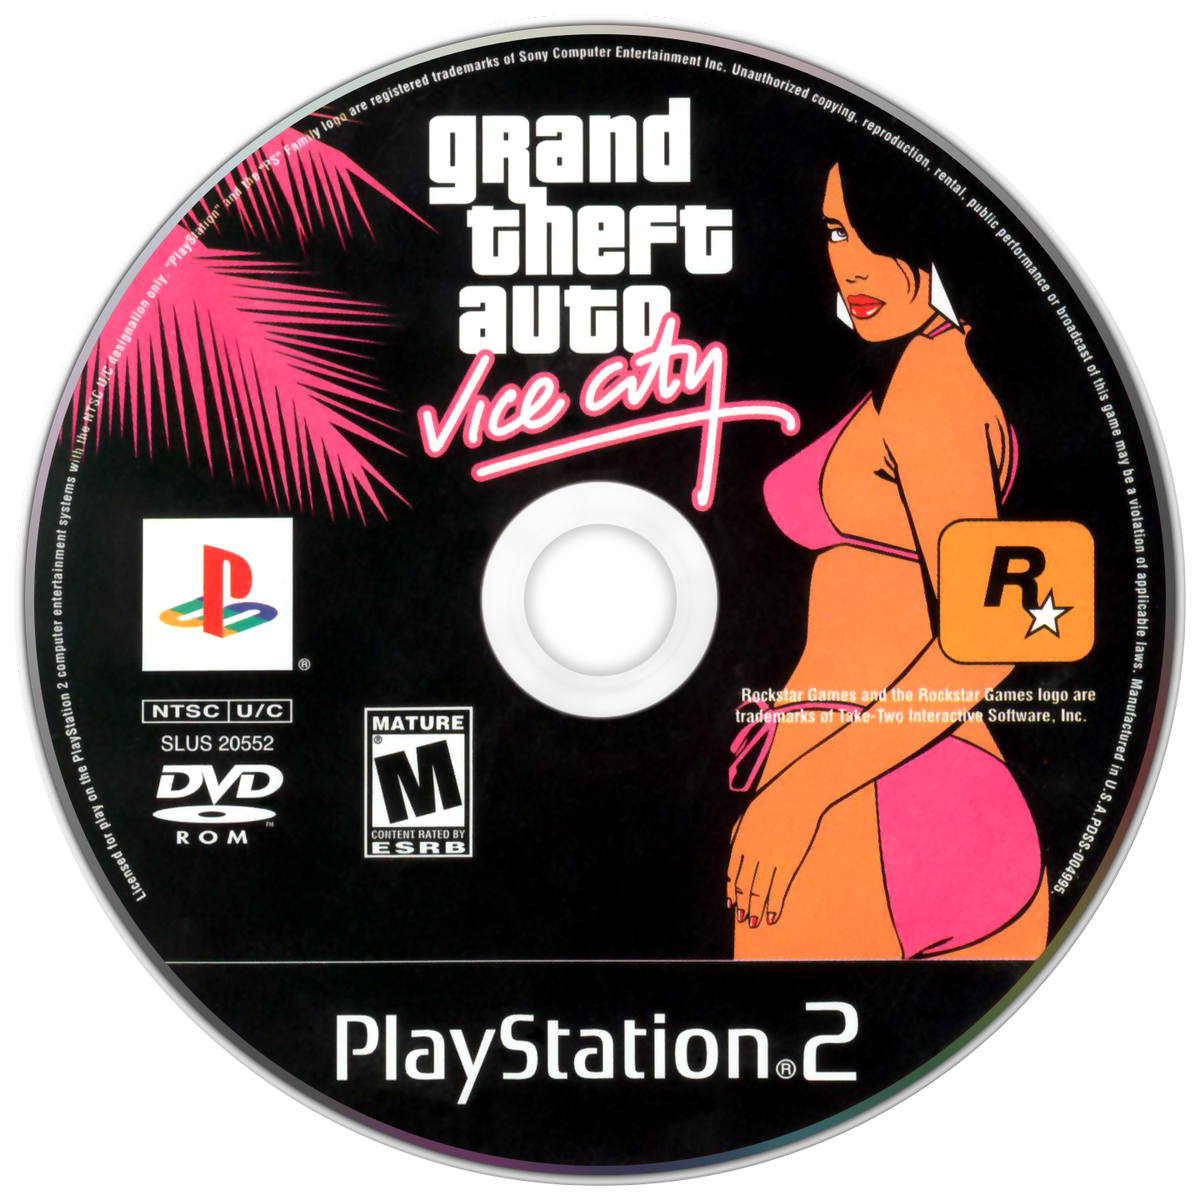 grand-theft-auto-vice-city-details-launchbox-games-database